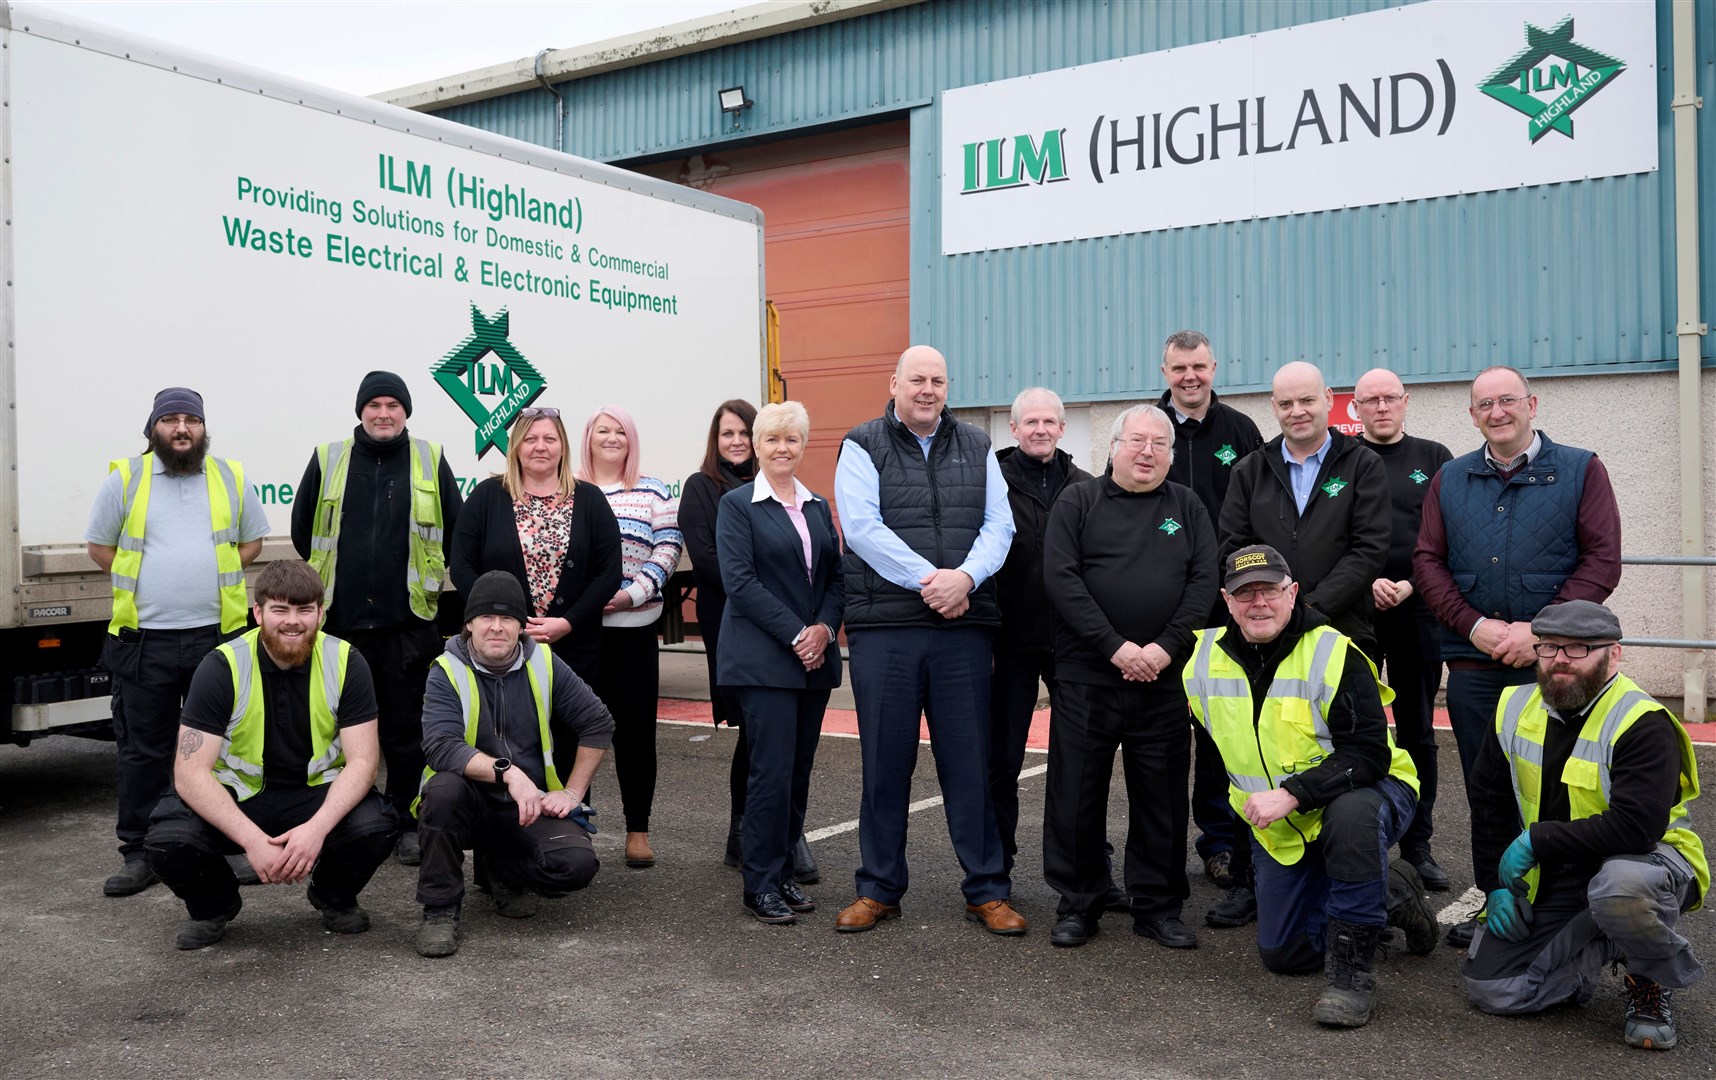 ILM Highland staff are celebrating their 30th anniversary, including (centre left) Sandra Ross, finance manager; and Martin Macleod, chief executive (centre right) with the ILM team.